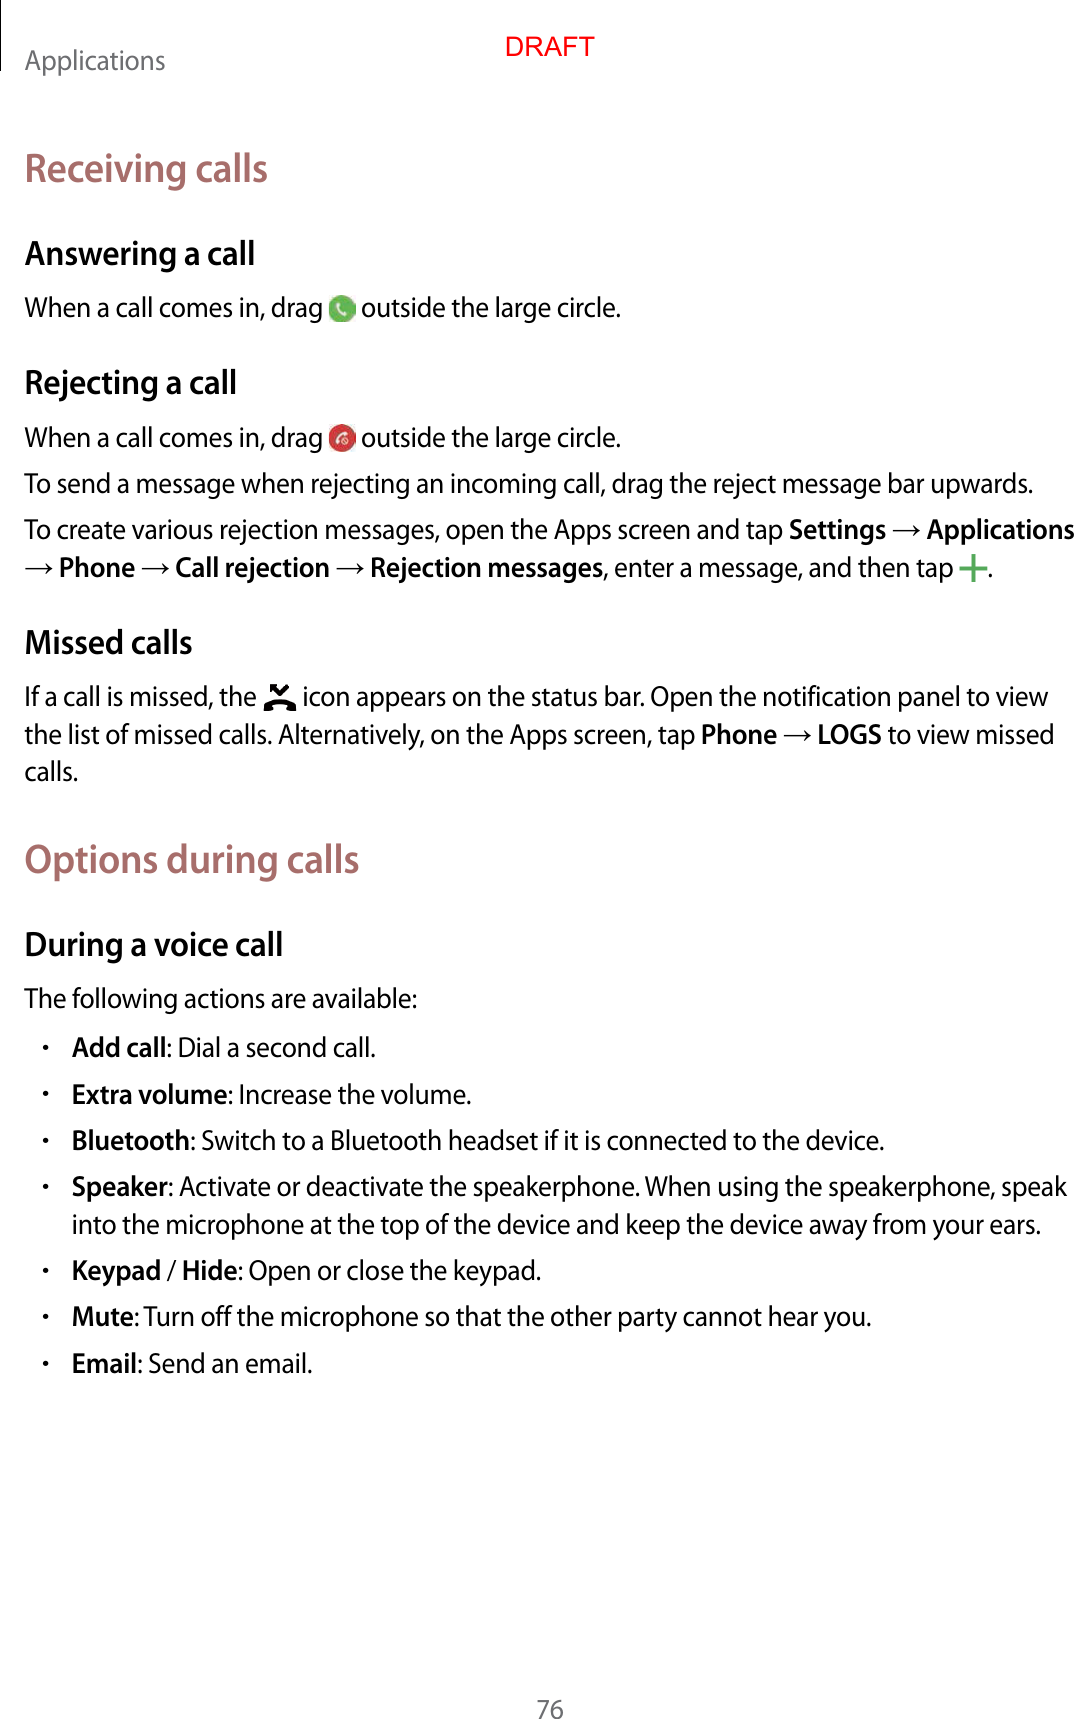 Applications76Receiving callsAnsw ering a callWhen a call comes in, drag   outside the large cir cle .Rejecting a callWhen a call comes in, drag   outside the large cir cle .To send a message when rejecting an incoming call, dr ag the r eject message bar upwards .To creat e various r ejection messages, open the Apps scr een and tap Settings  Applications  Phone  Call r ejection  Rejection messages, enter a message , and then tap  .Missed callsIf a call is missed, the   icon appears on the status bar. Open the notification panel t o view the list of missed calls. Alt ernativ ely, on the Apps scr een, tap Phone  LOGS to view missed calls.Options during callsDuring a voic e callThe f ollowing actions are a vailable:•Add call: Dial a second call.•Extra volume: Increase the volume .•Bluetooth: Switch t o a Bluetooth headset if it is c onnected to the device.•Speaker: Activate or deactivate the speakerphone . When using the speakerphone , speak into the micr ophone at the t op of the device and keep the devic e a wa y fr om y our ears .•Keypad / Hide: Open or close the keypad.•Mute: Turn off the microphone so tha t the other party cannot hear you.•Email: Send an email.DRAFT